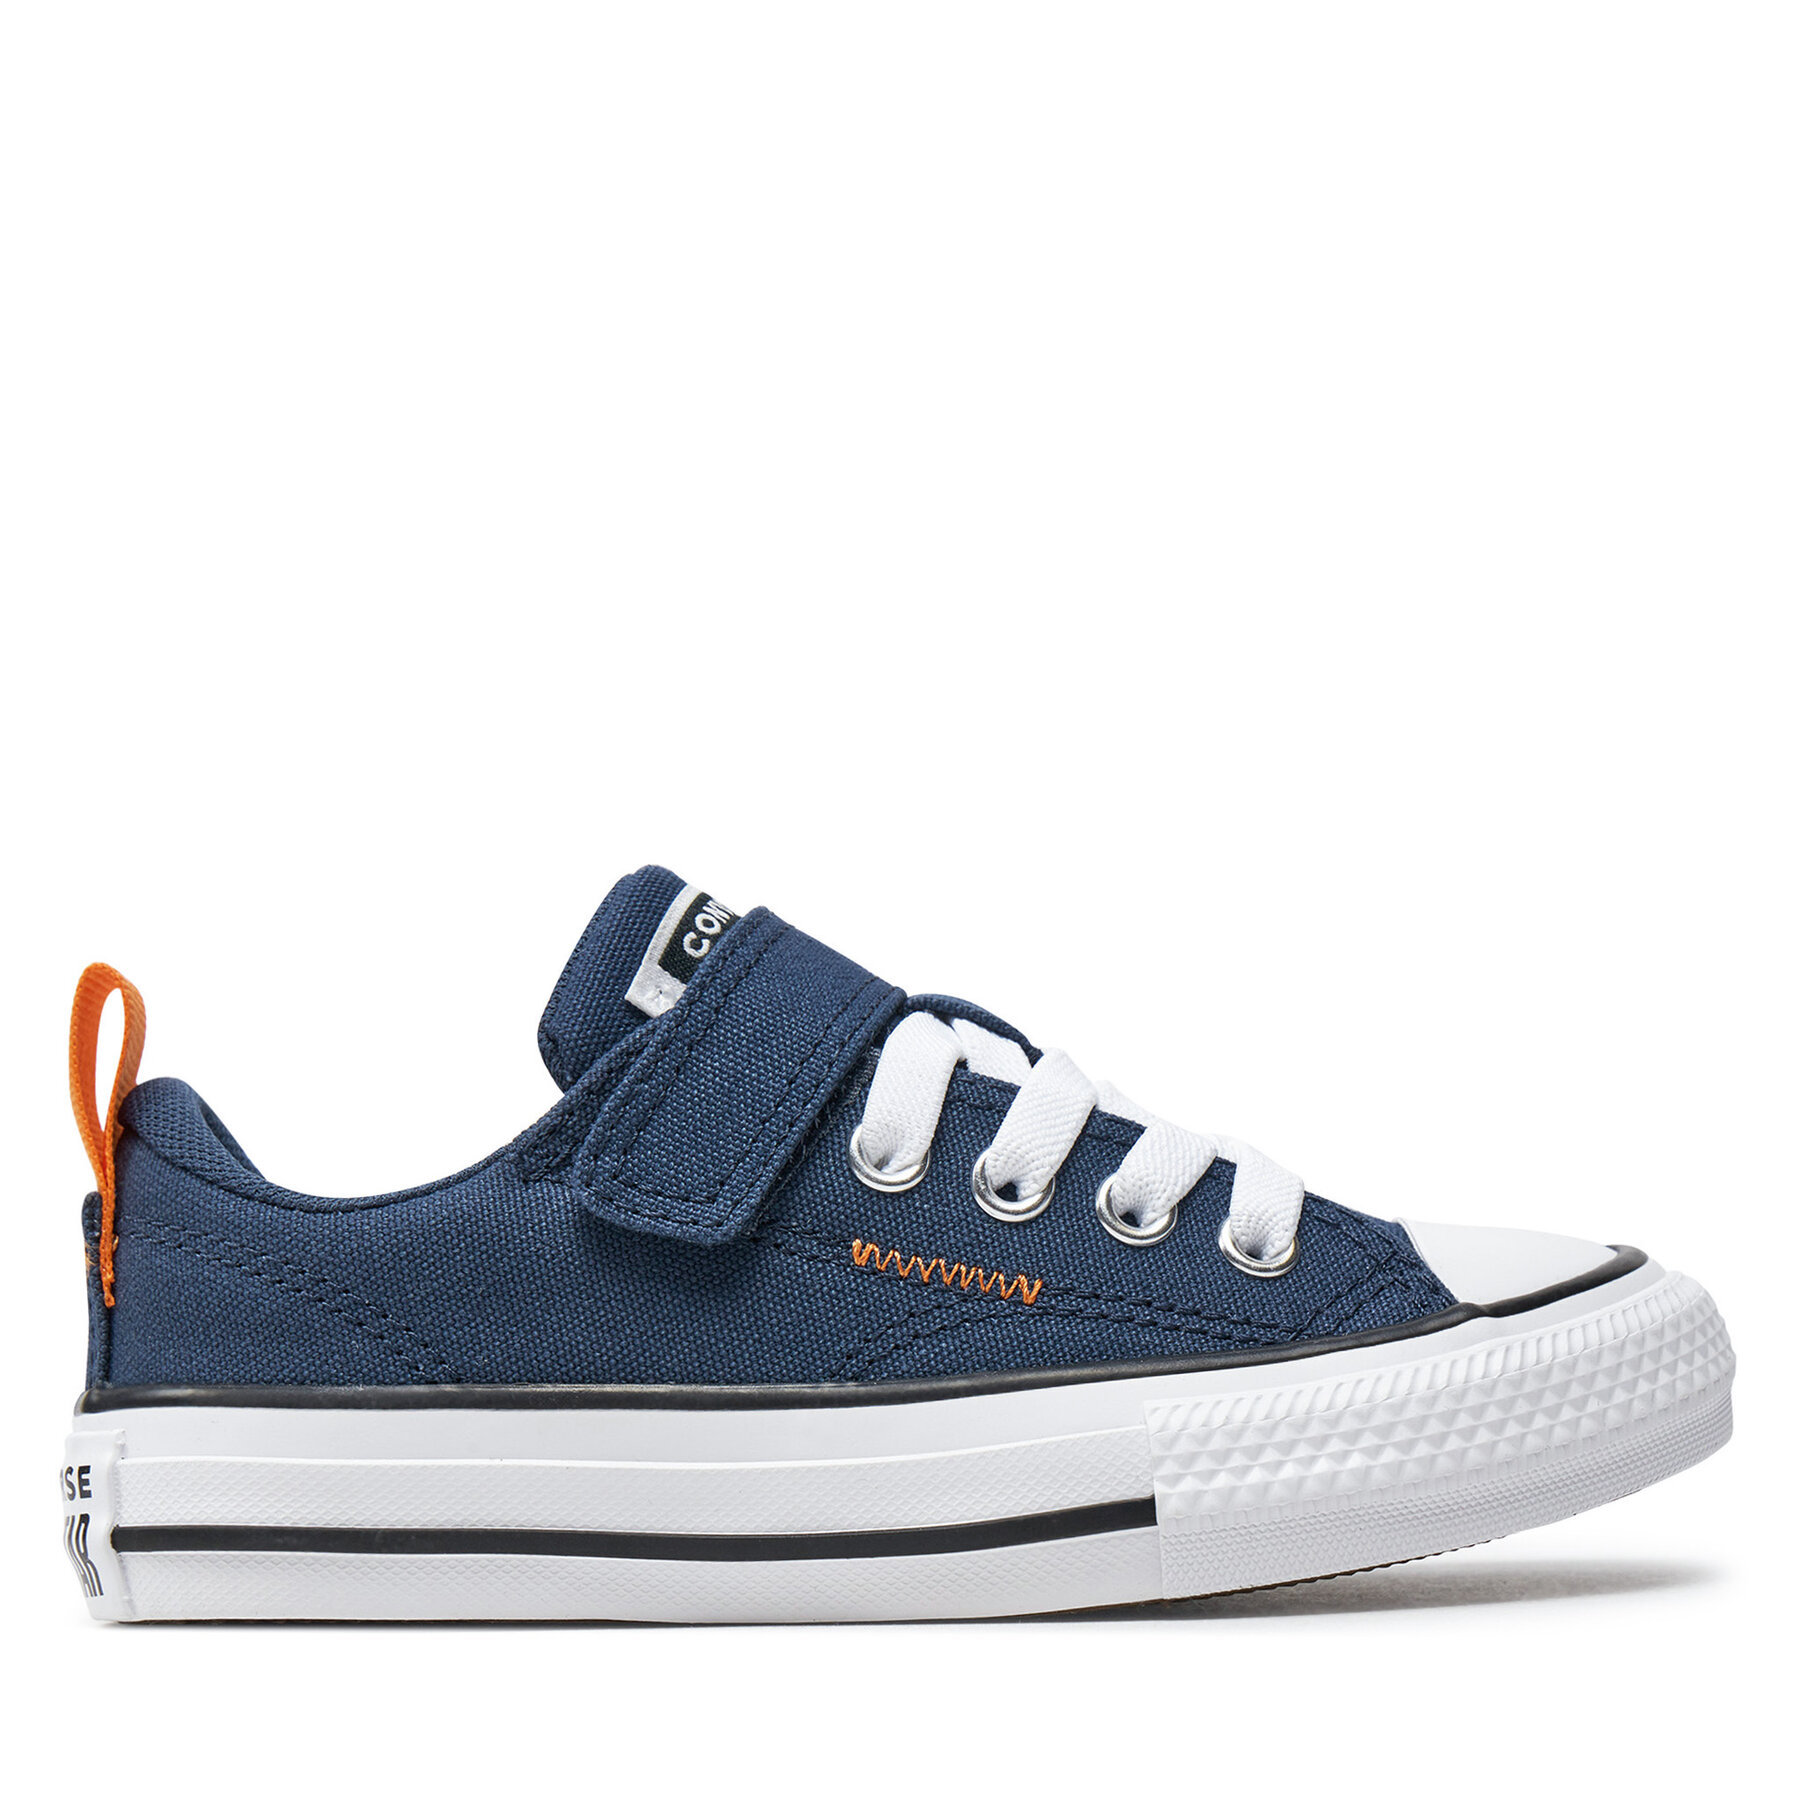 Sneakers aus Stoff Converse Chuck Taylor All Star Malden Street Easy On A07384C Navy/Pale Magma/White von Converse